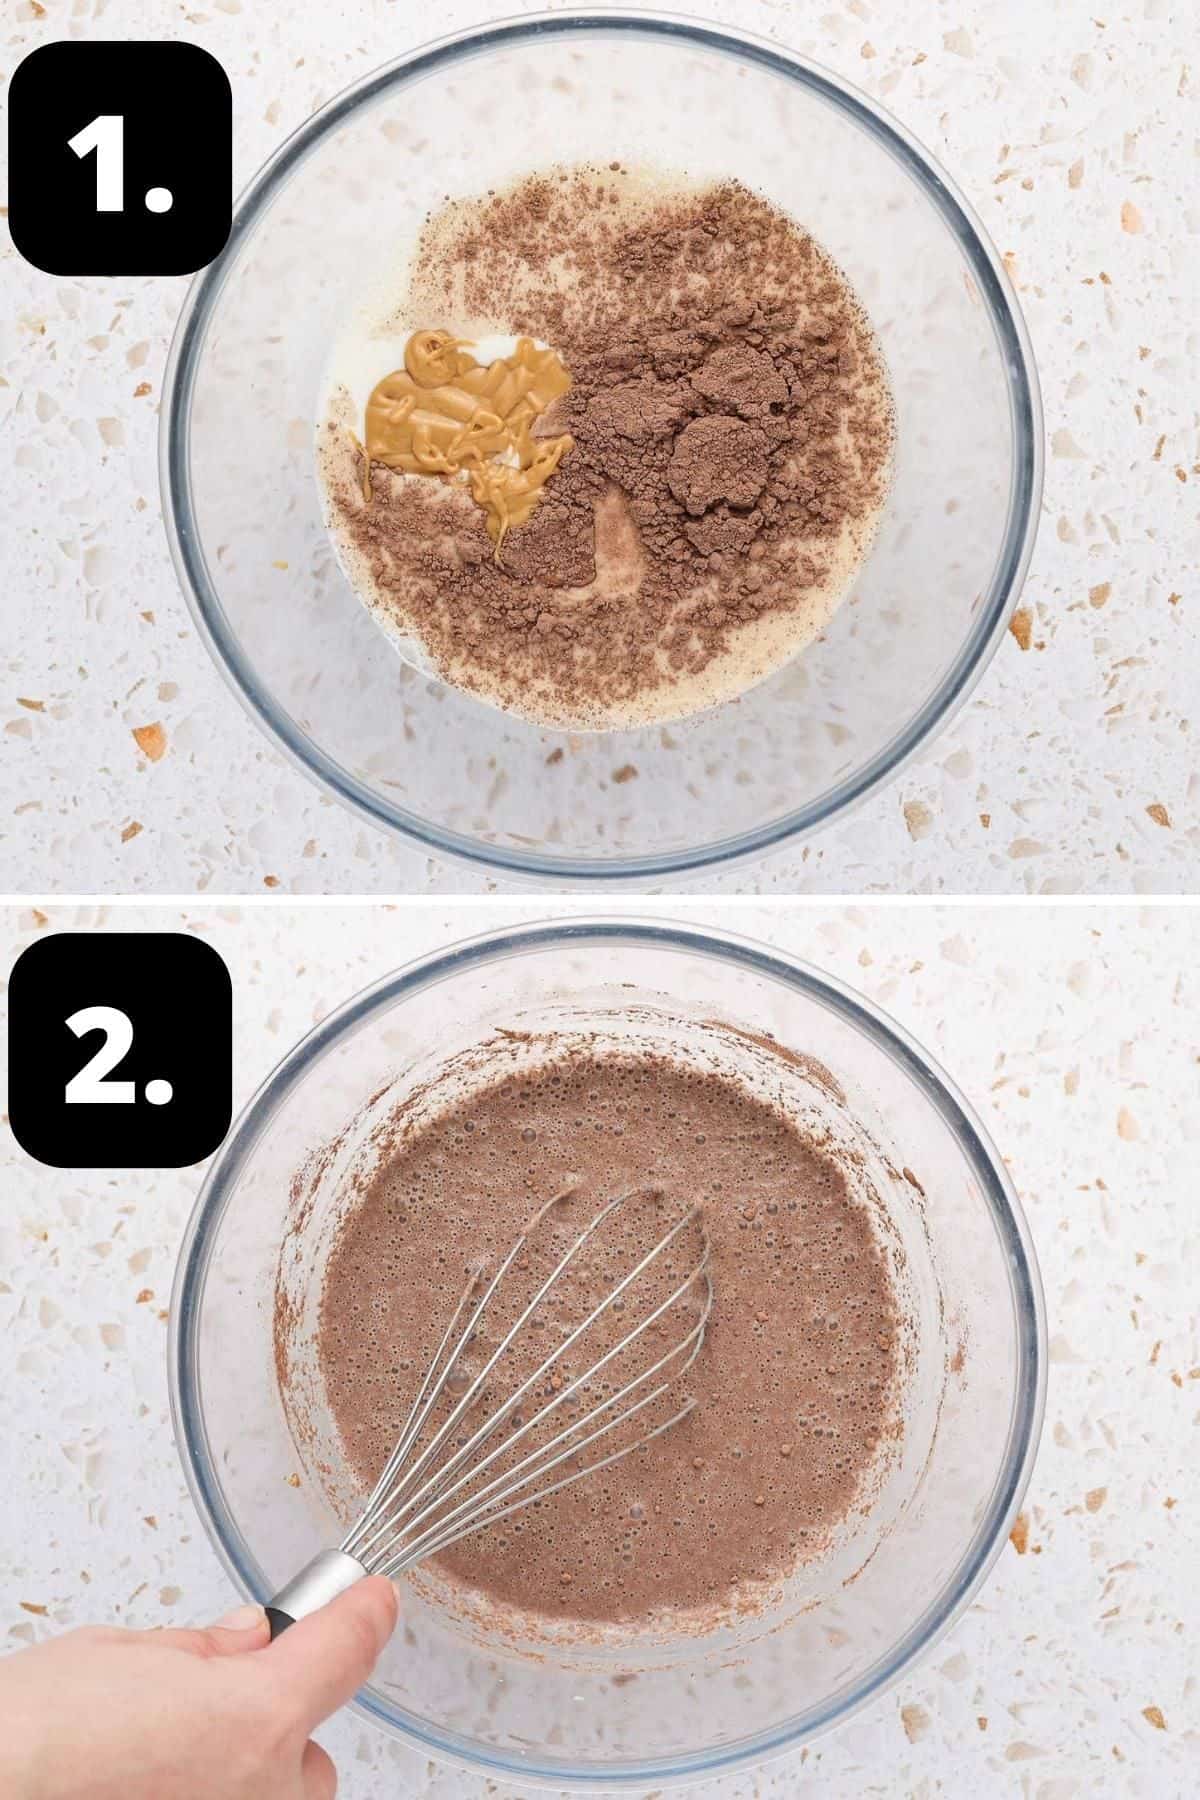 Steps 1-2 of preparing this recipe - the cacao, peanut butter and milk in a bowl and the mixture combined.